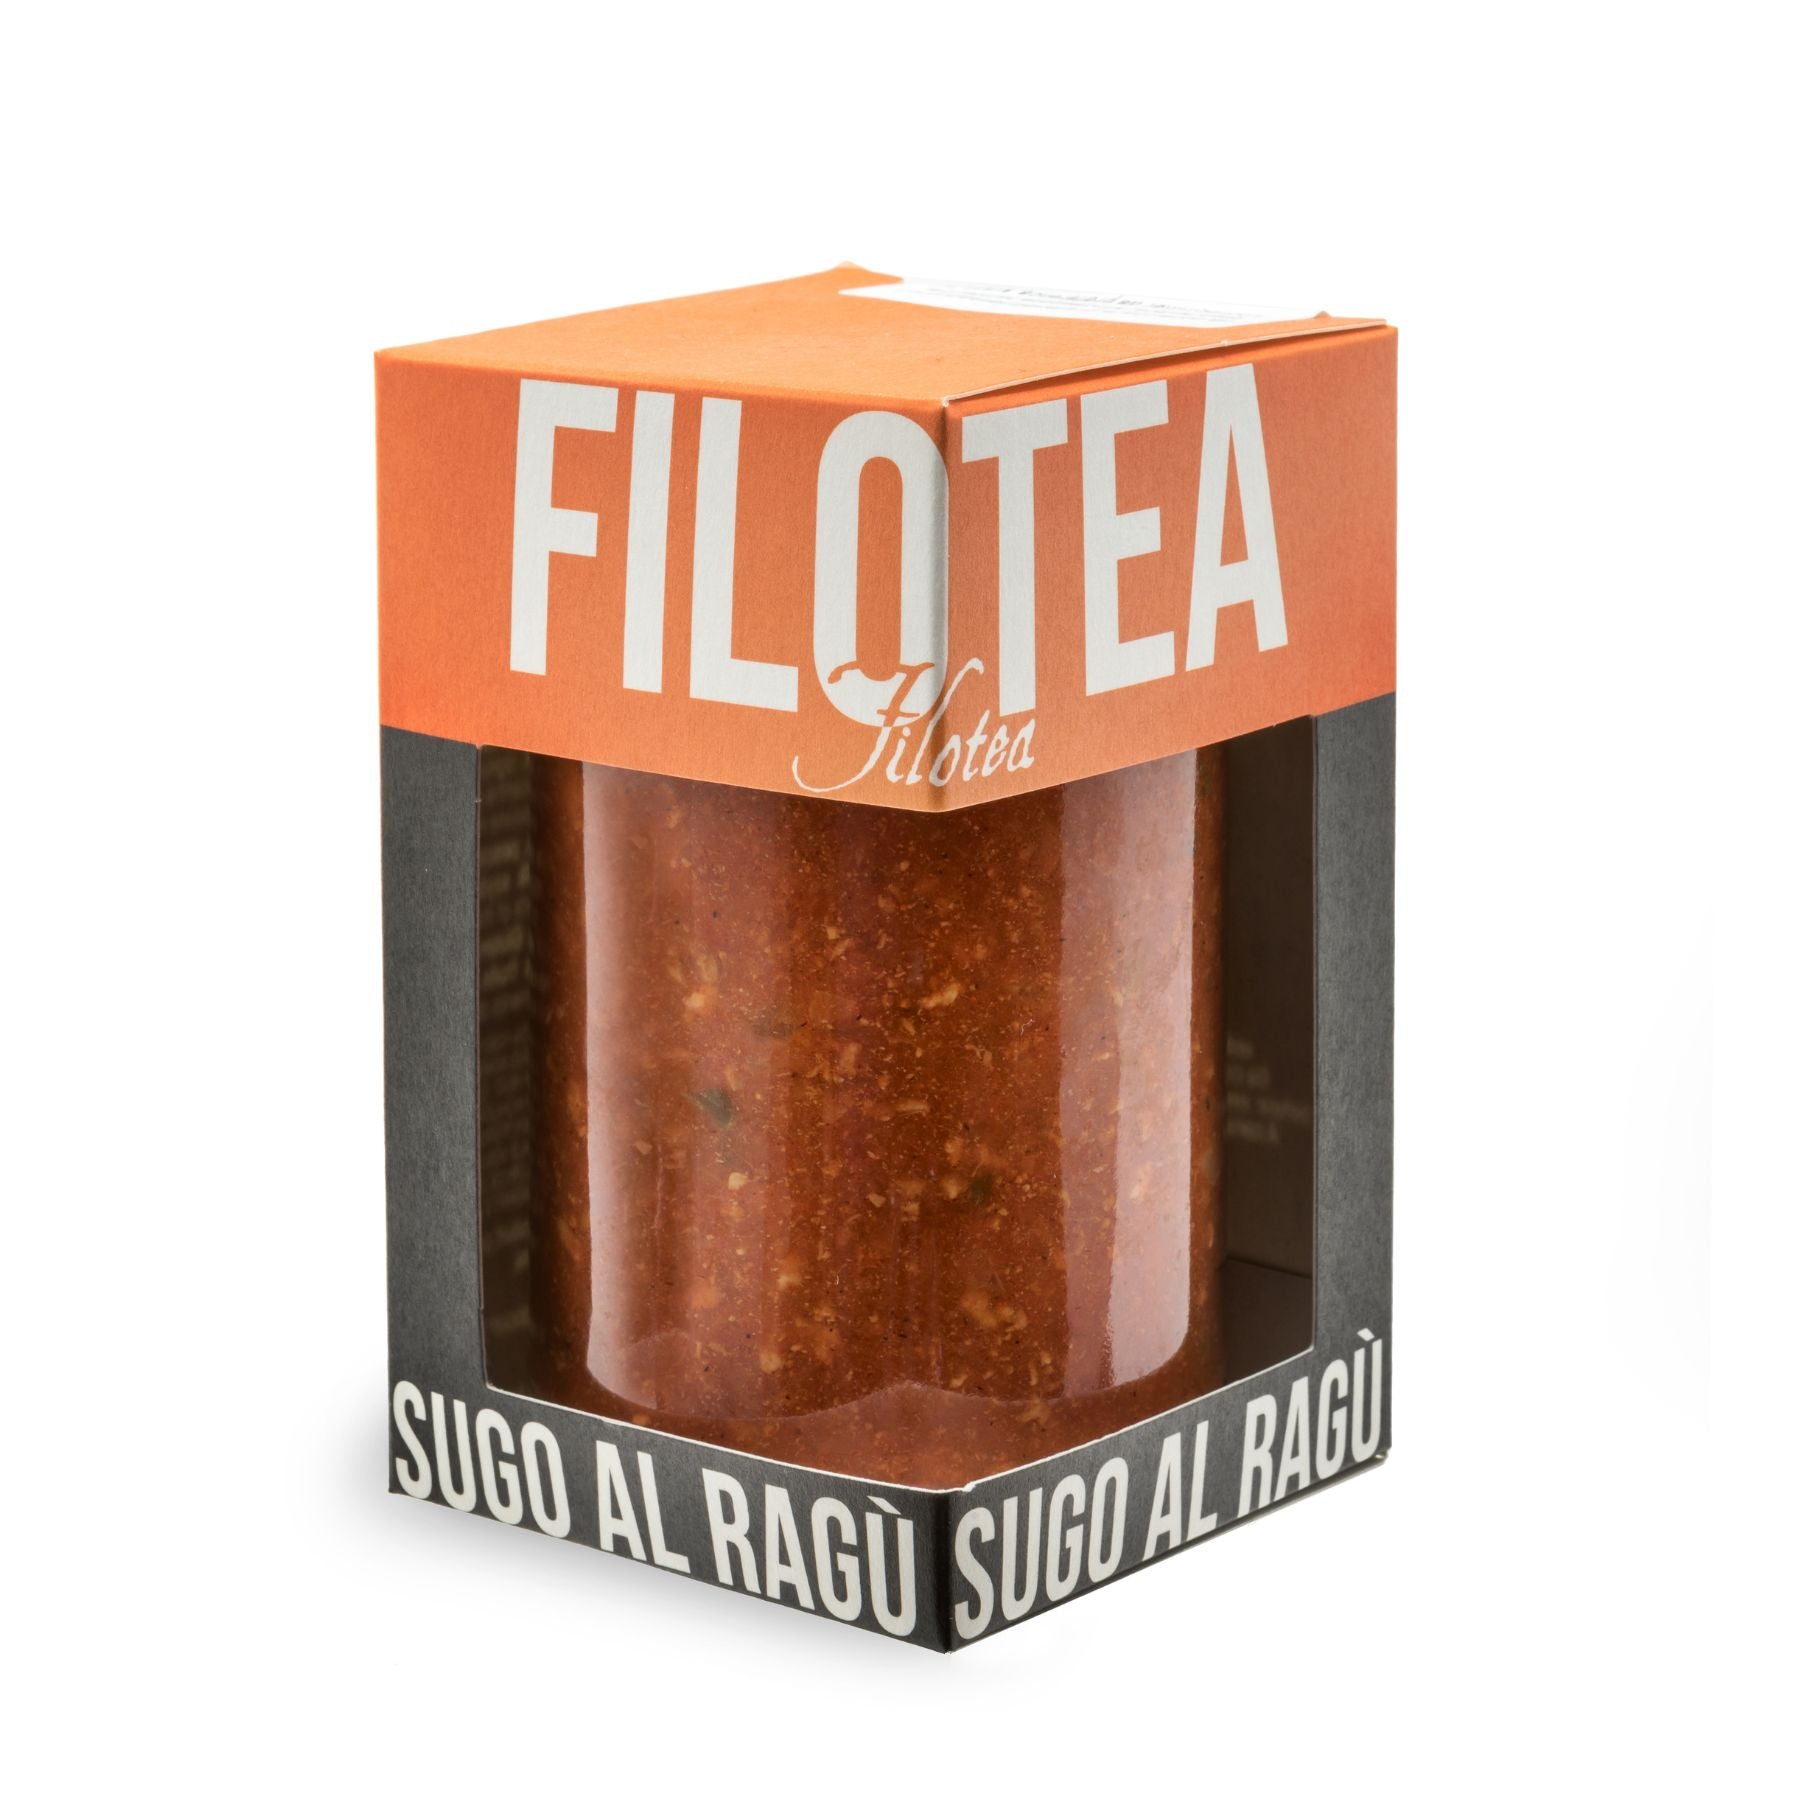 Filotea Sicilian Ragu Pasta Sauce 280g | Imported and distributed in the UK by Just Gourmet Foods